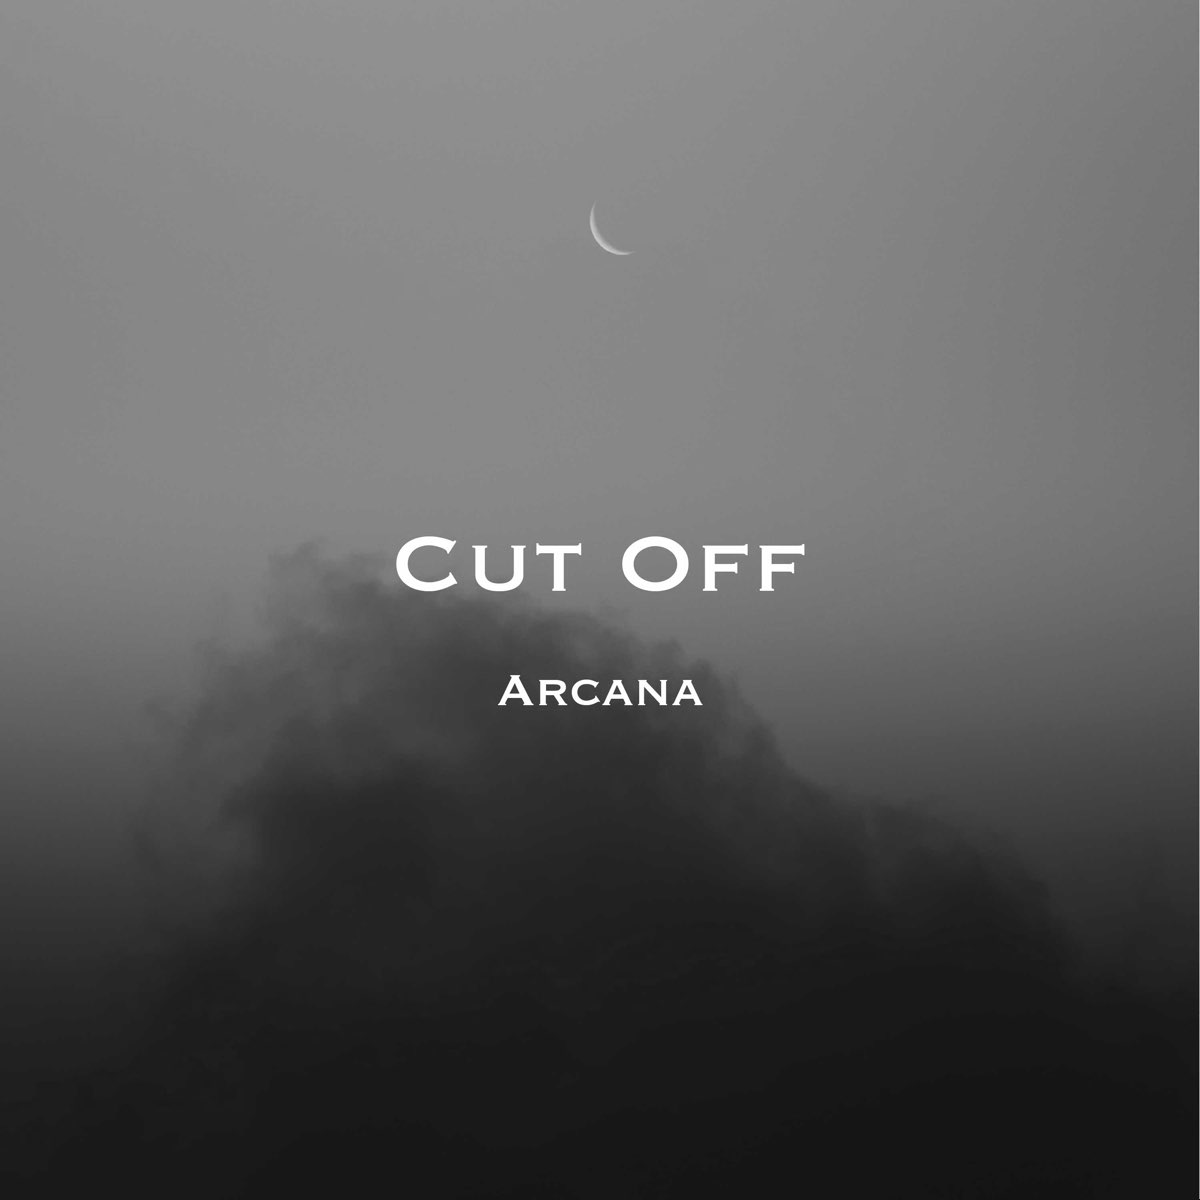 Off songs. Cut off Lonely. Cut off - Lonely (Original Mix). Arcana альбомы. Cut off Lonely кто поёт.